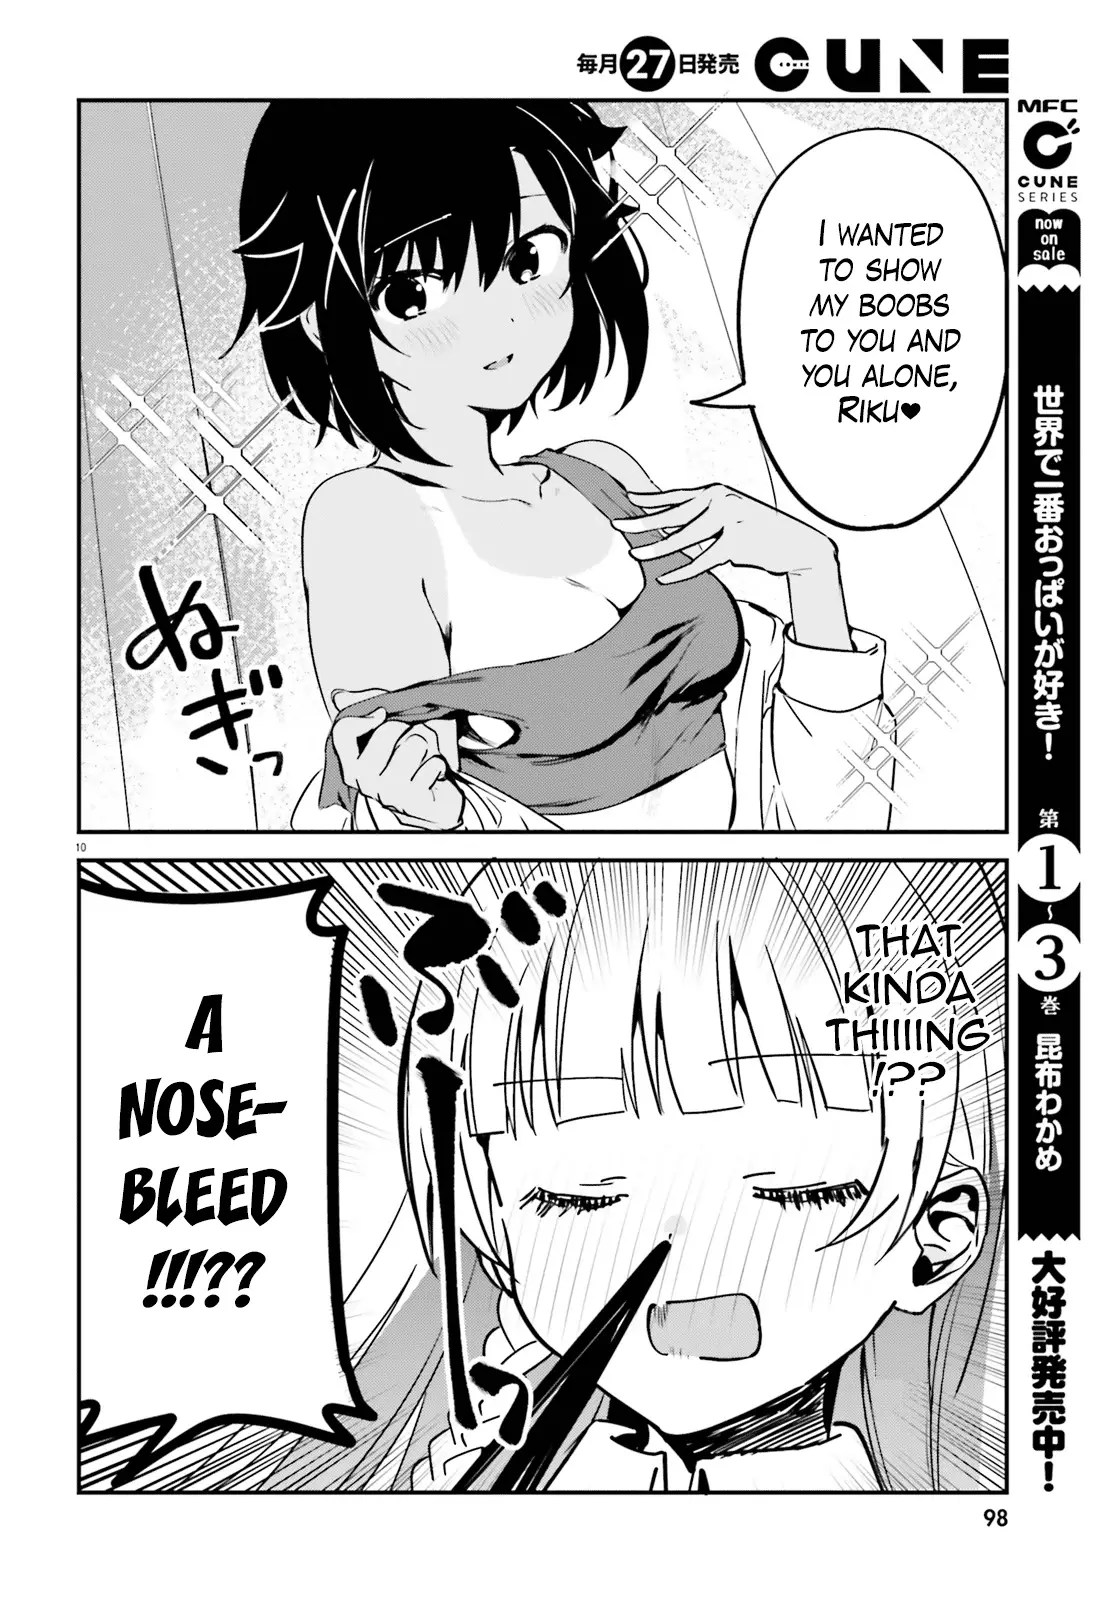 I Like Oppai Best In The World! - 38 page 9